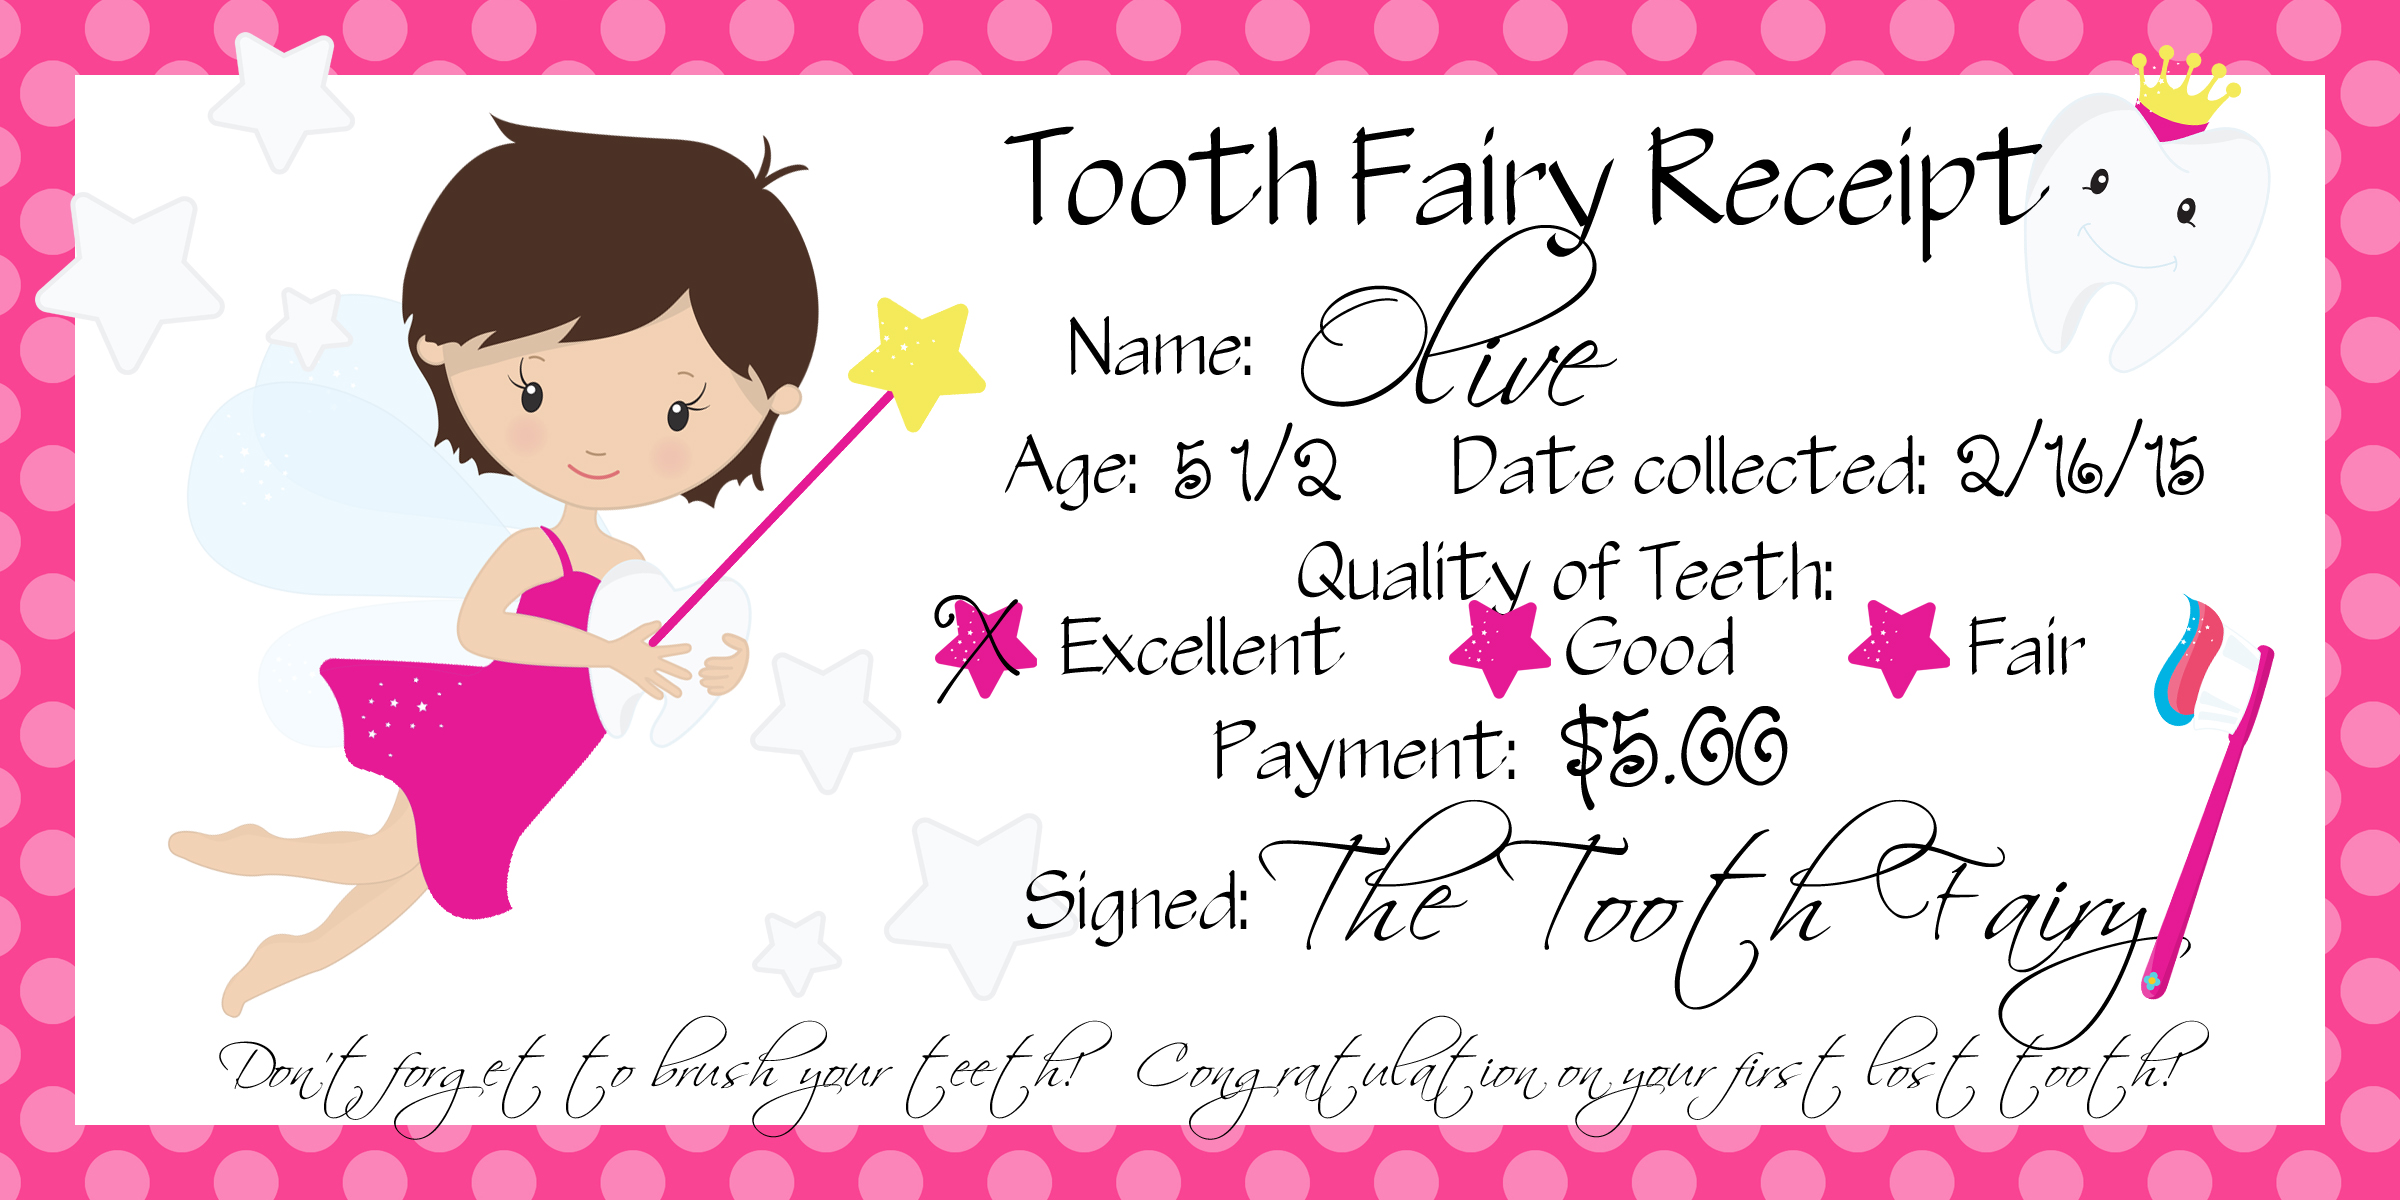 O's first lost tooth Tooth Fairy Receipt Free printable